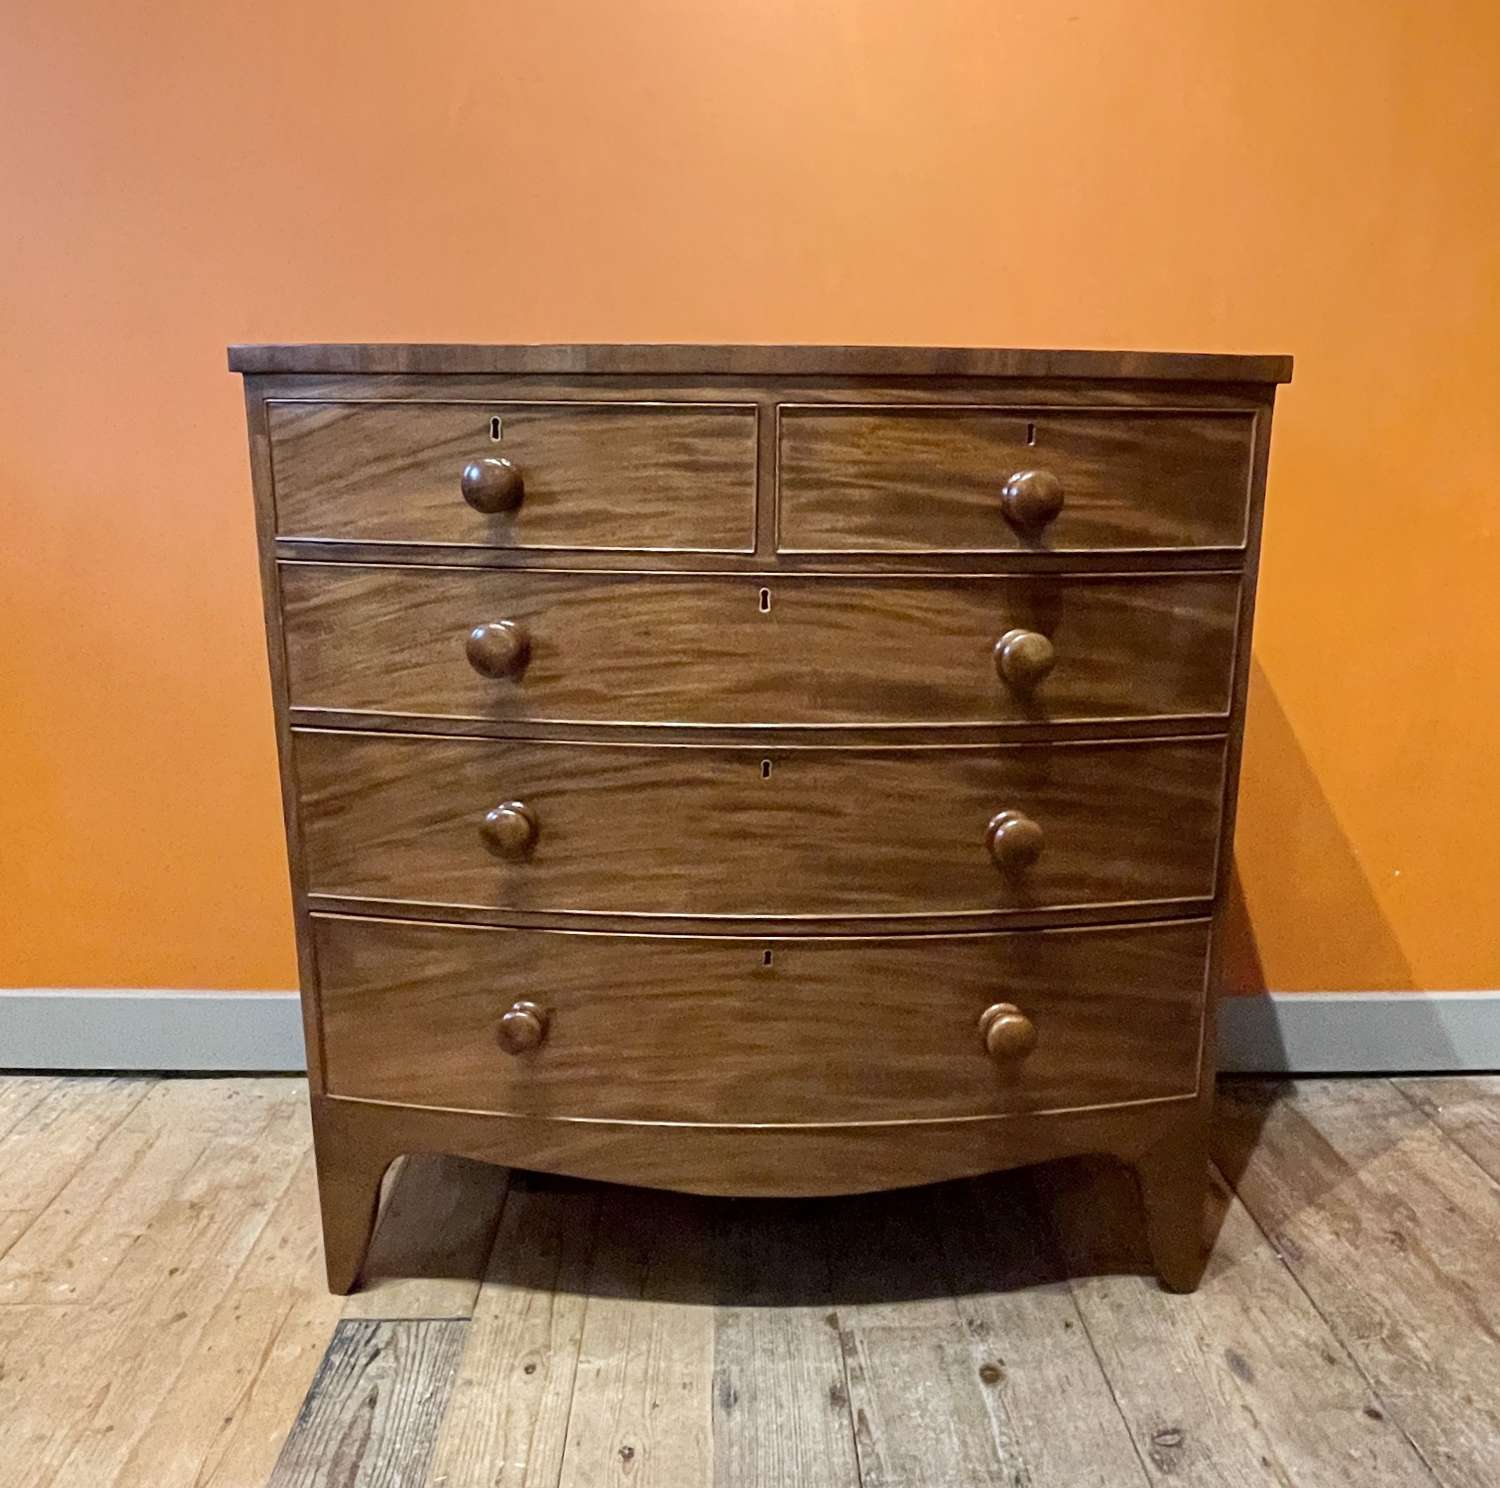 Regency Mahogany Bowfront Chest of Drawers